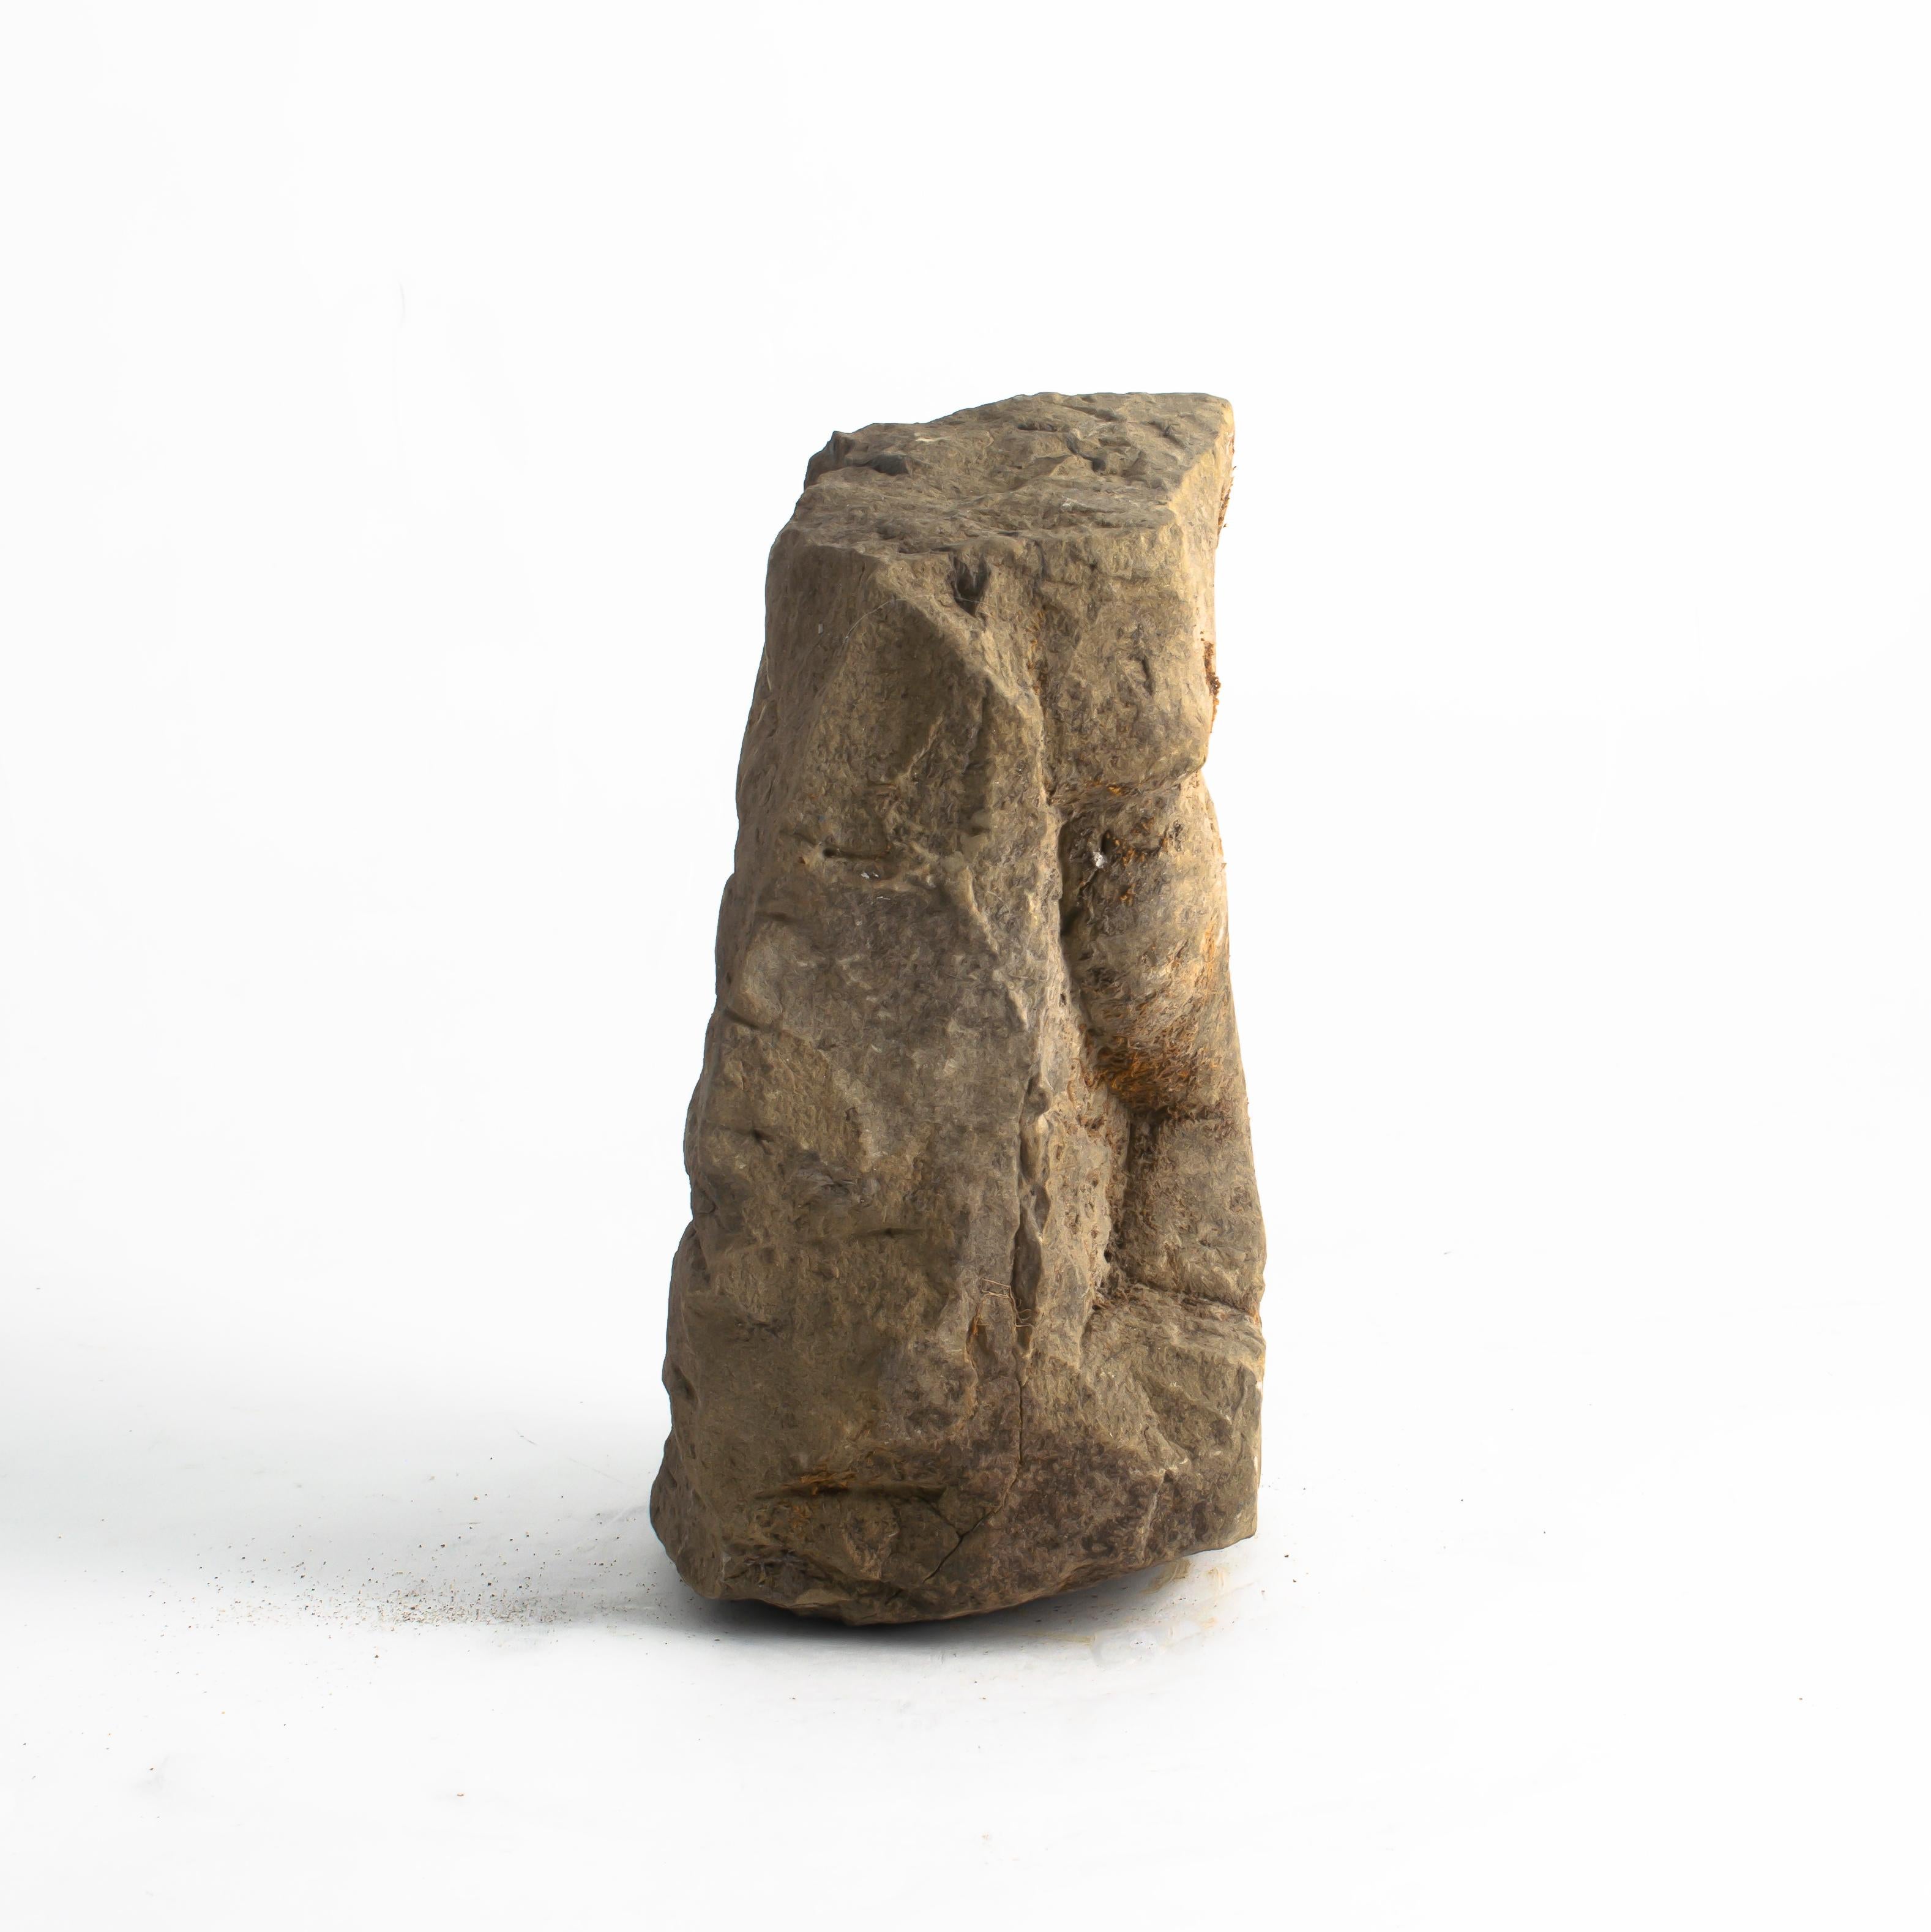 Other 400-600 Years Old Sandstone Sculpture Leg Fragment